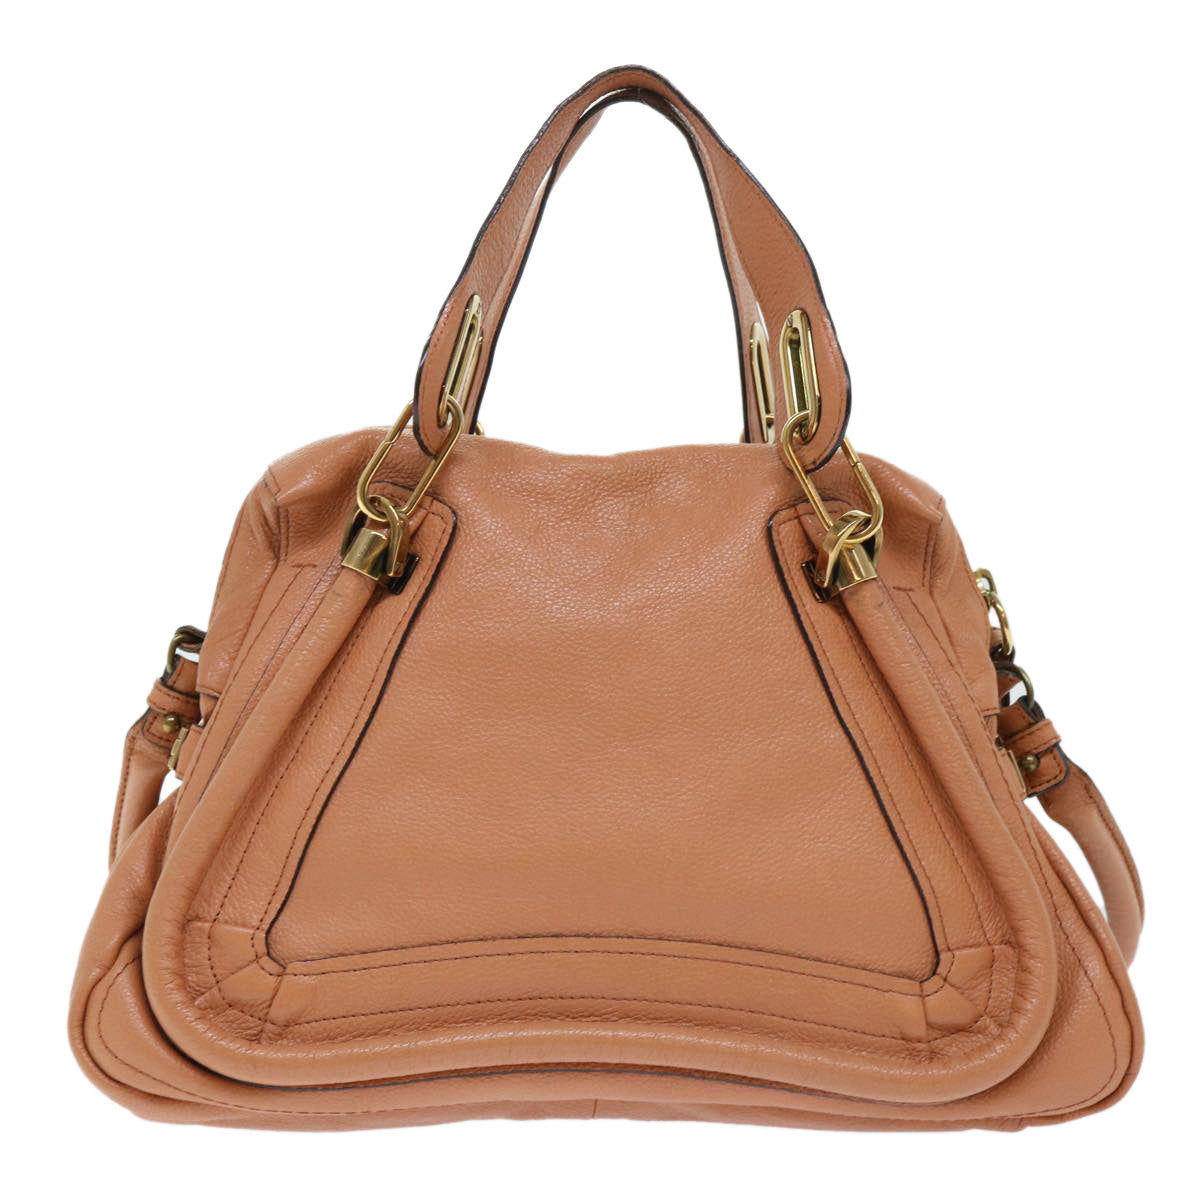 Chloe Paraty Hand Bag Leather 2way Brown 02-11-50 Auth am4850